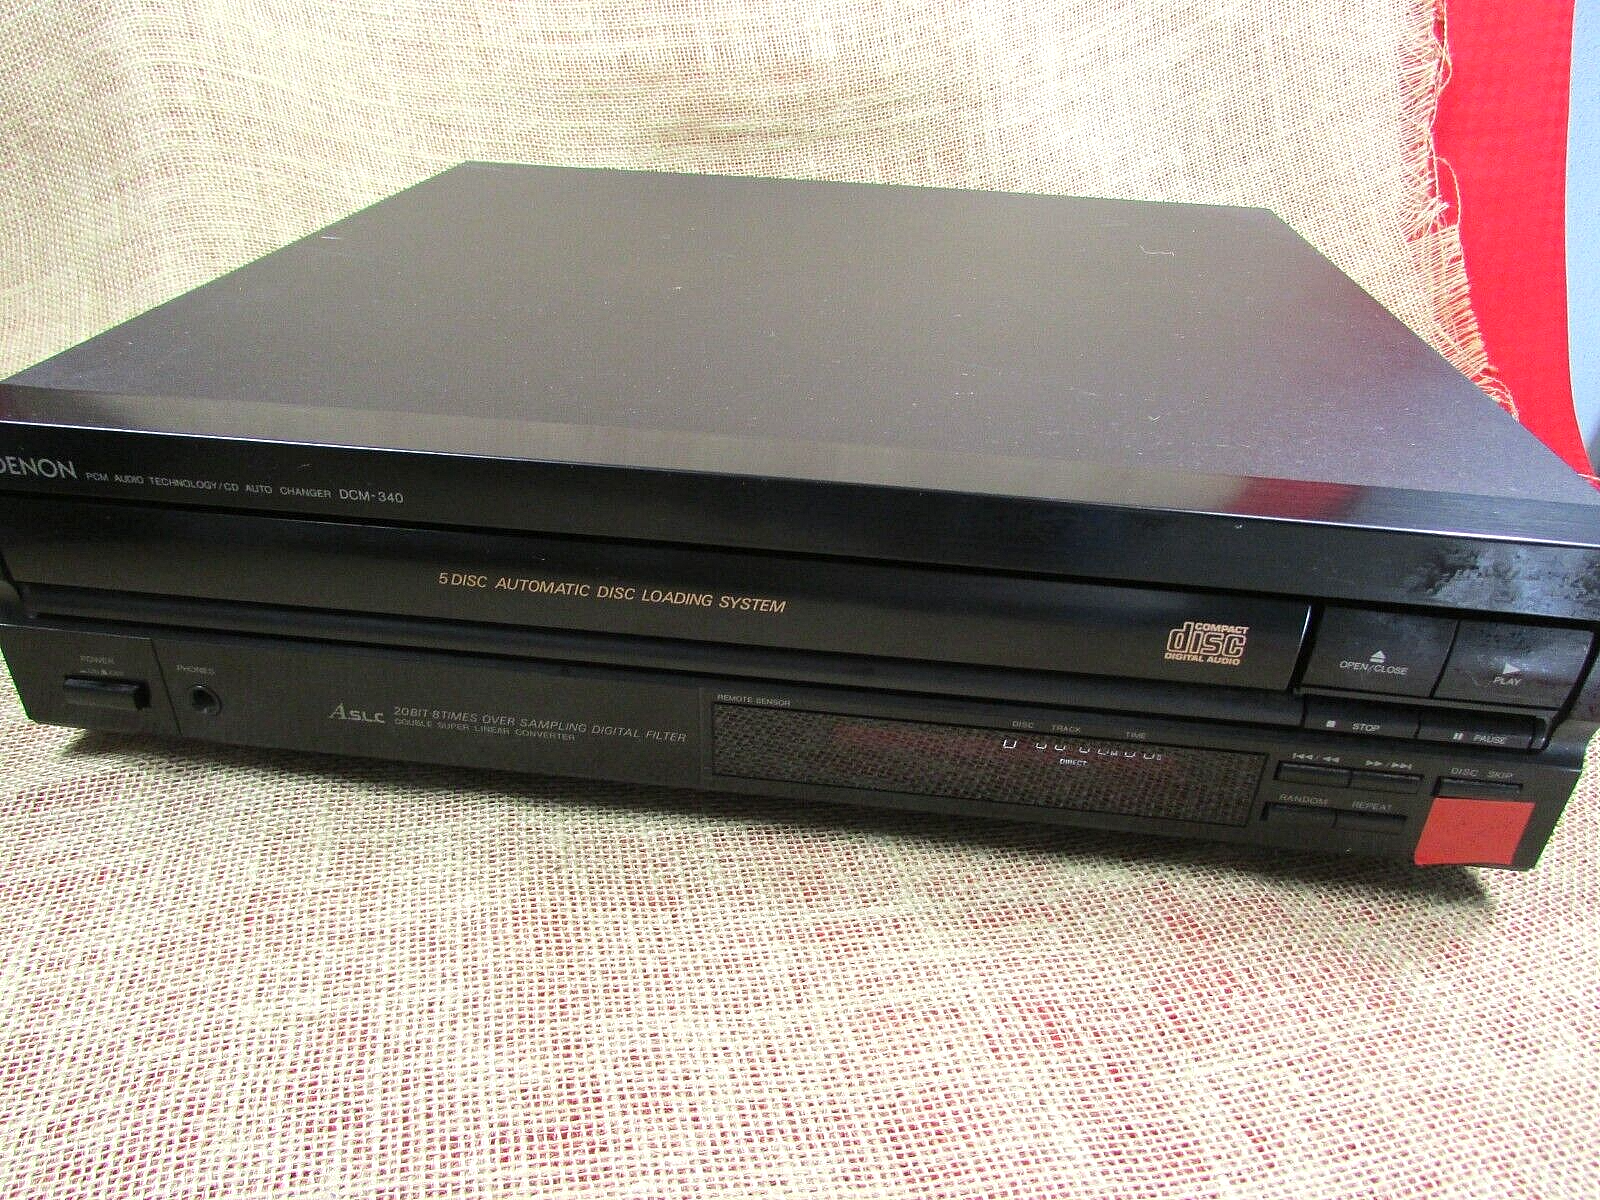 DENON DCM-340 COMPACT DISC PLAYER 5-DISC CD CHANGER *TESTED* ( No Remote) - $67.15